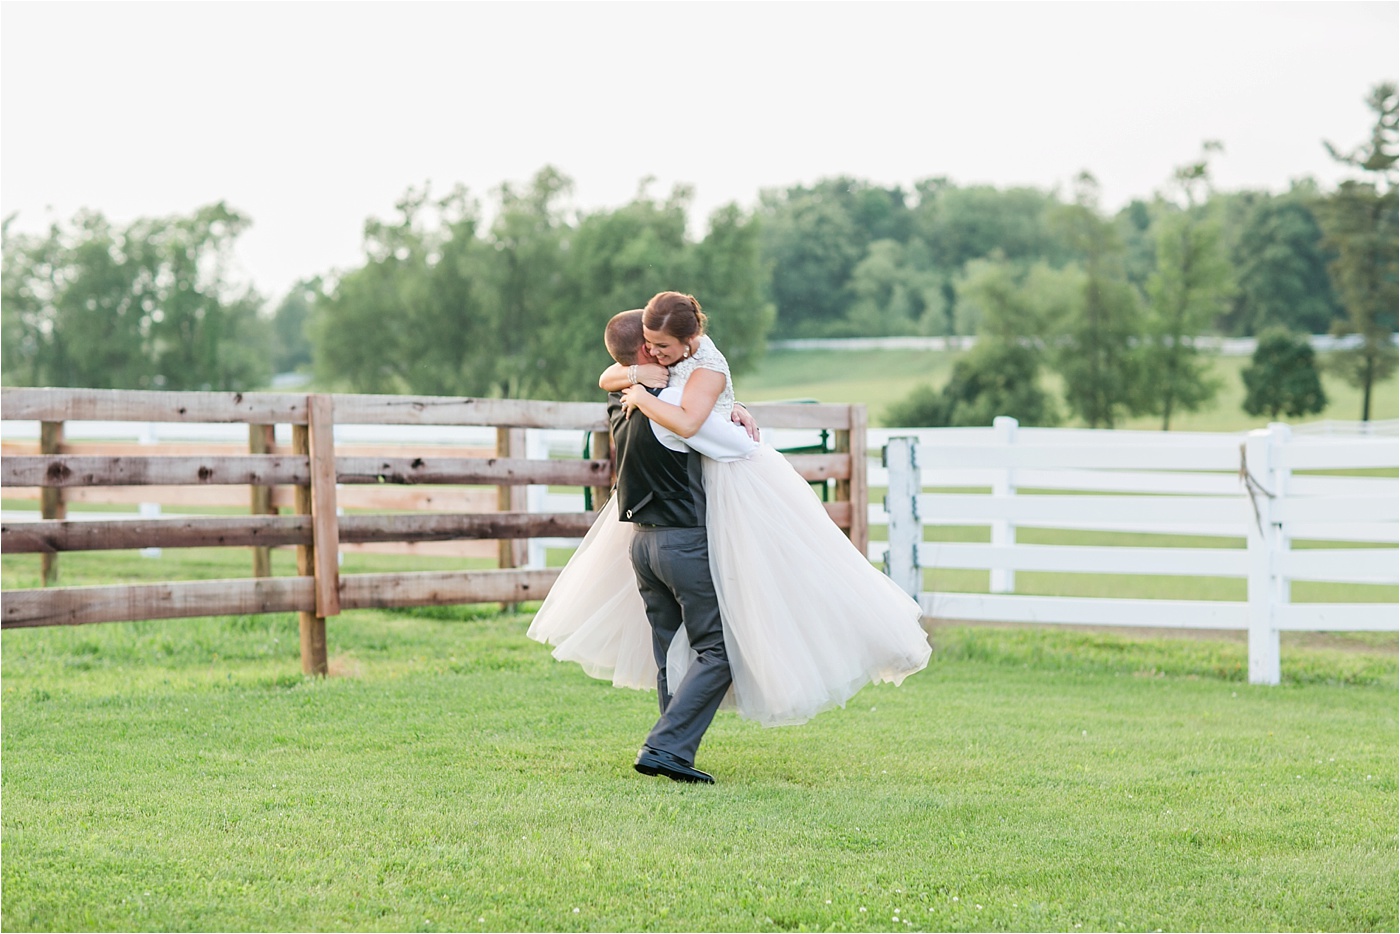 A Blush Outdoor wedding at Irongate Equestrian | KariMe Photography_0188